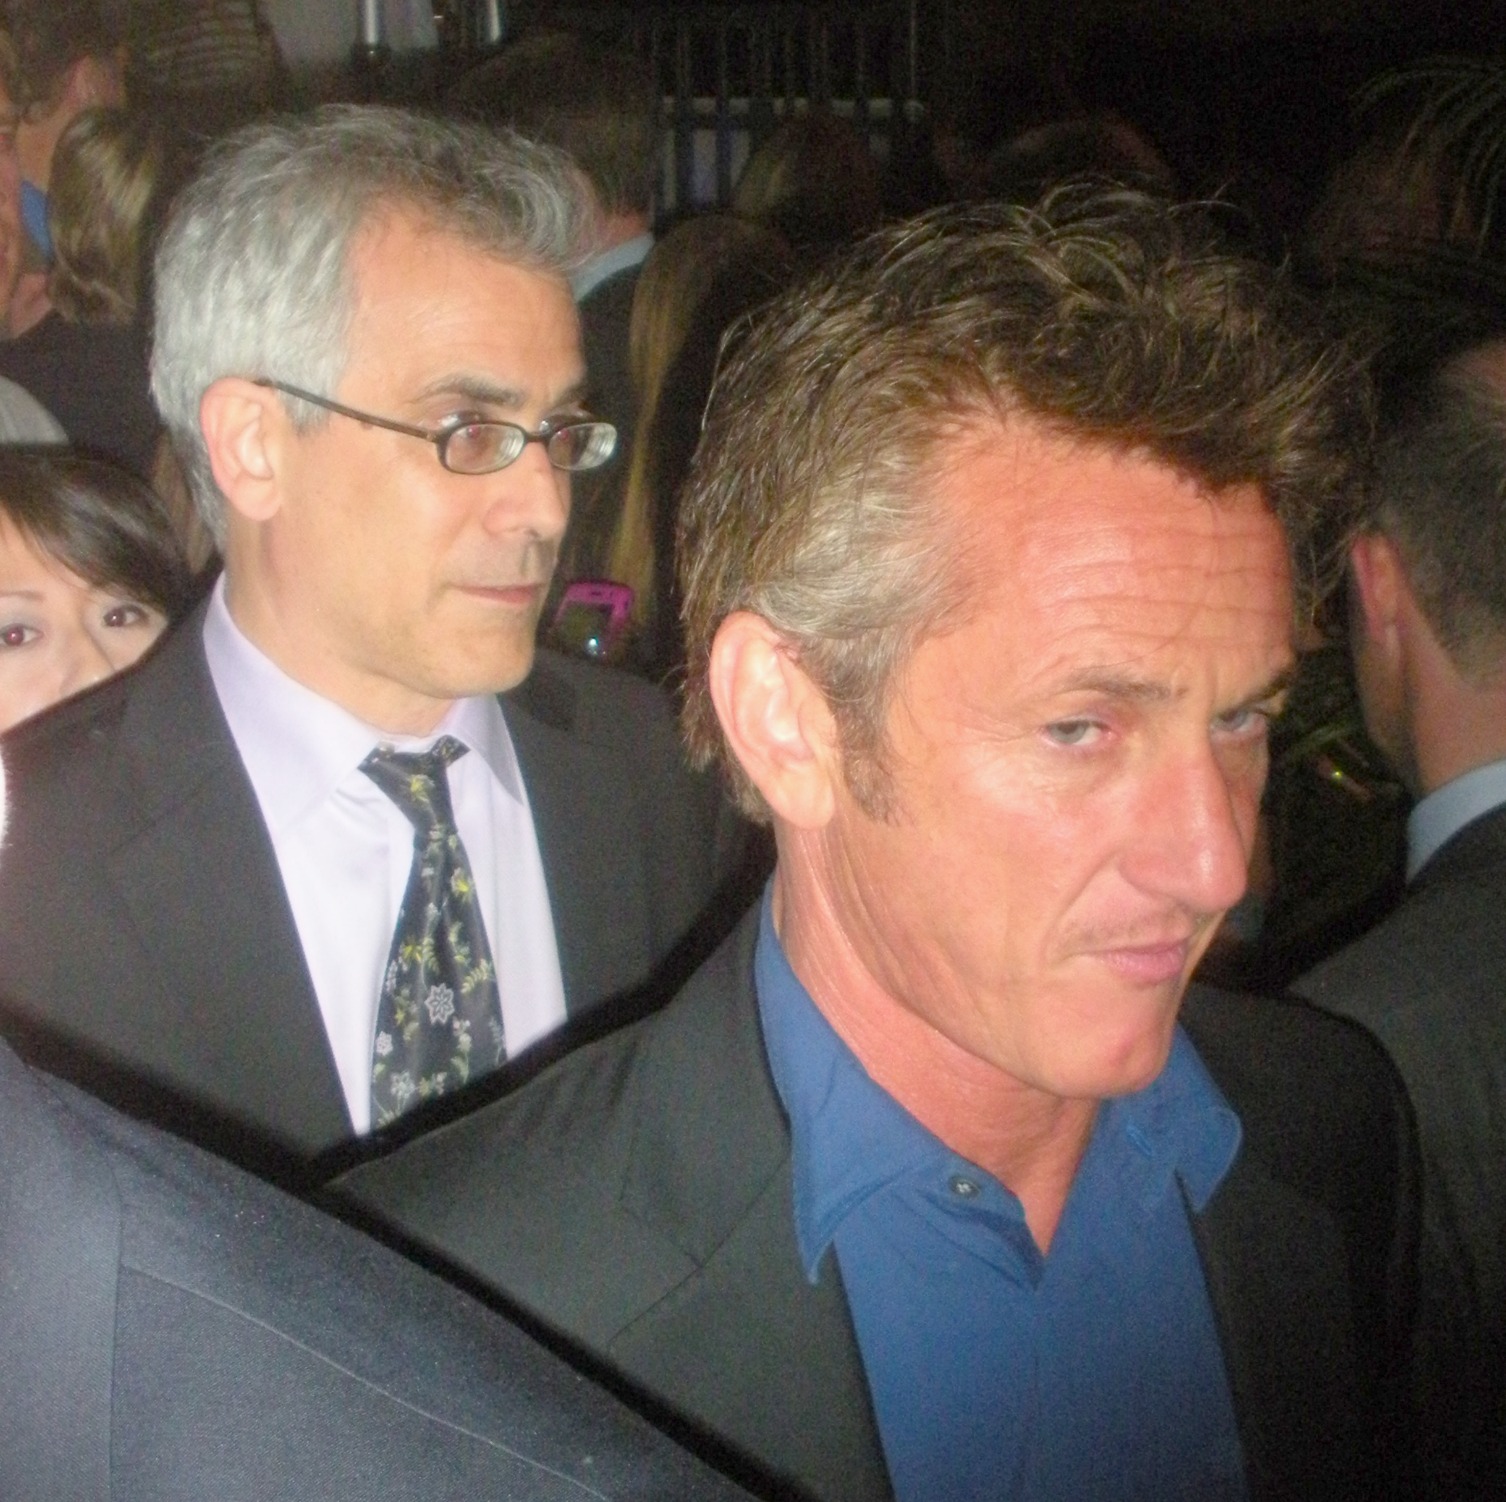 Sean Penn looks for breathing room at Funny or Die party.